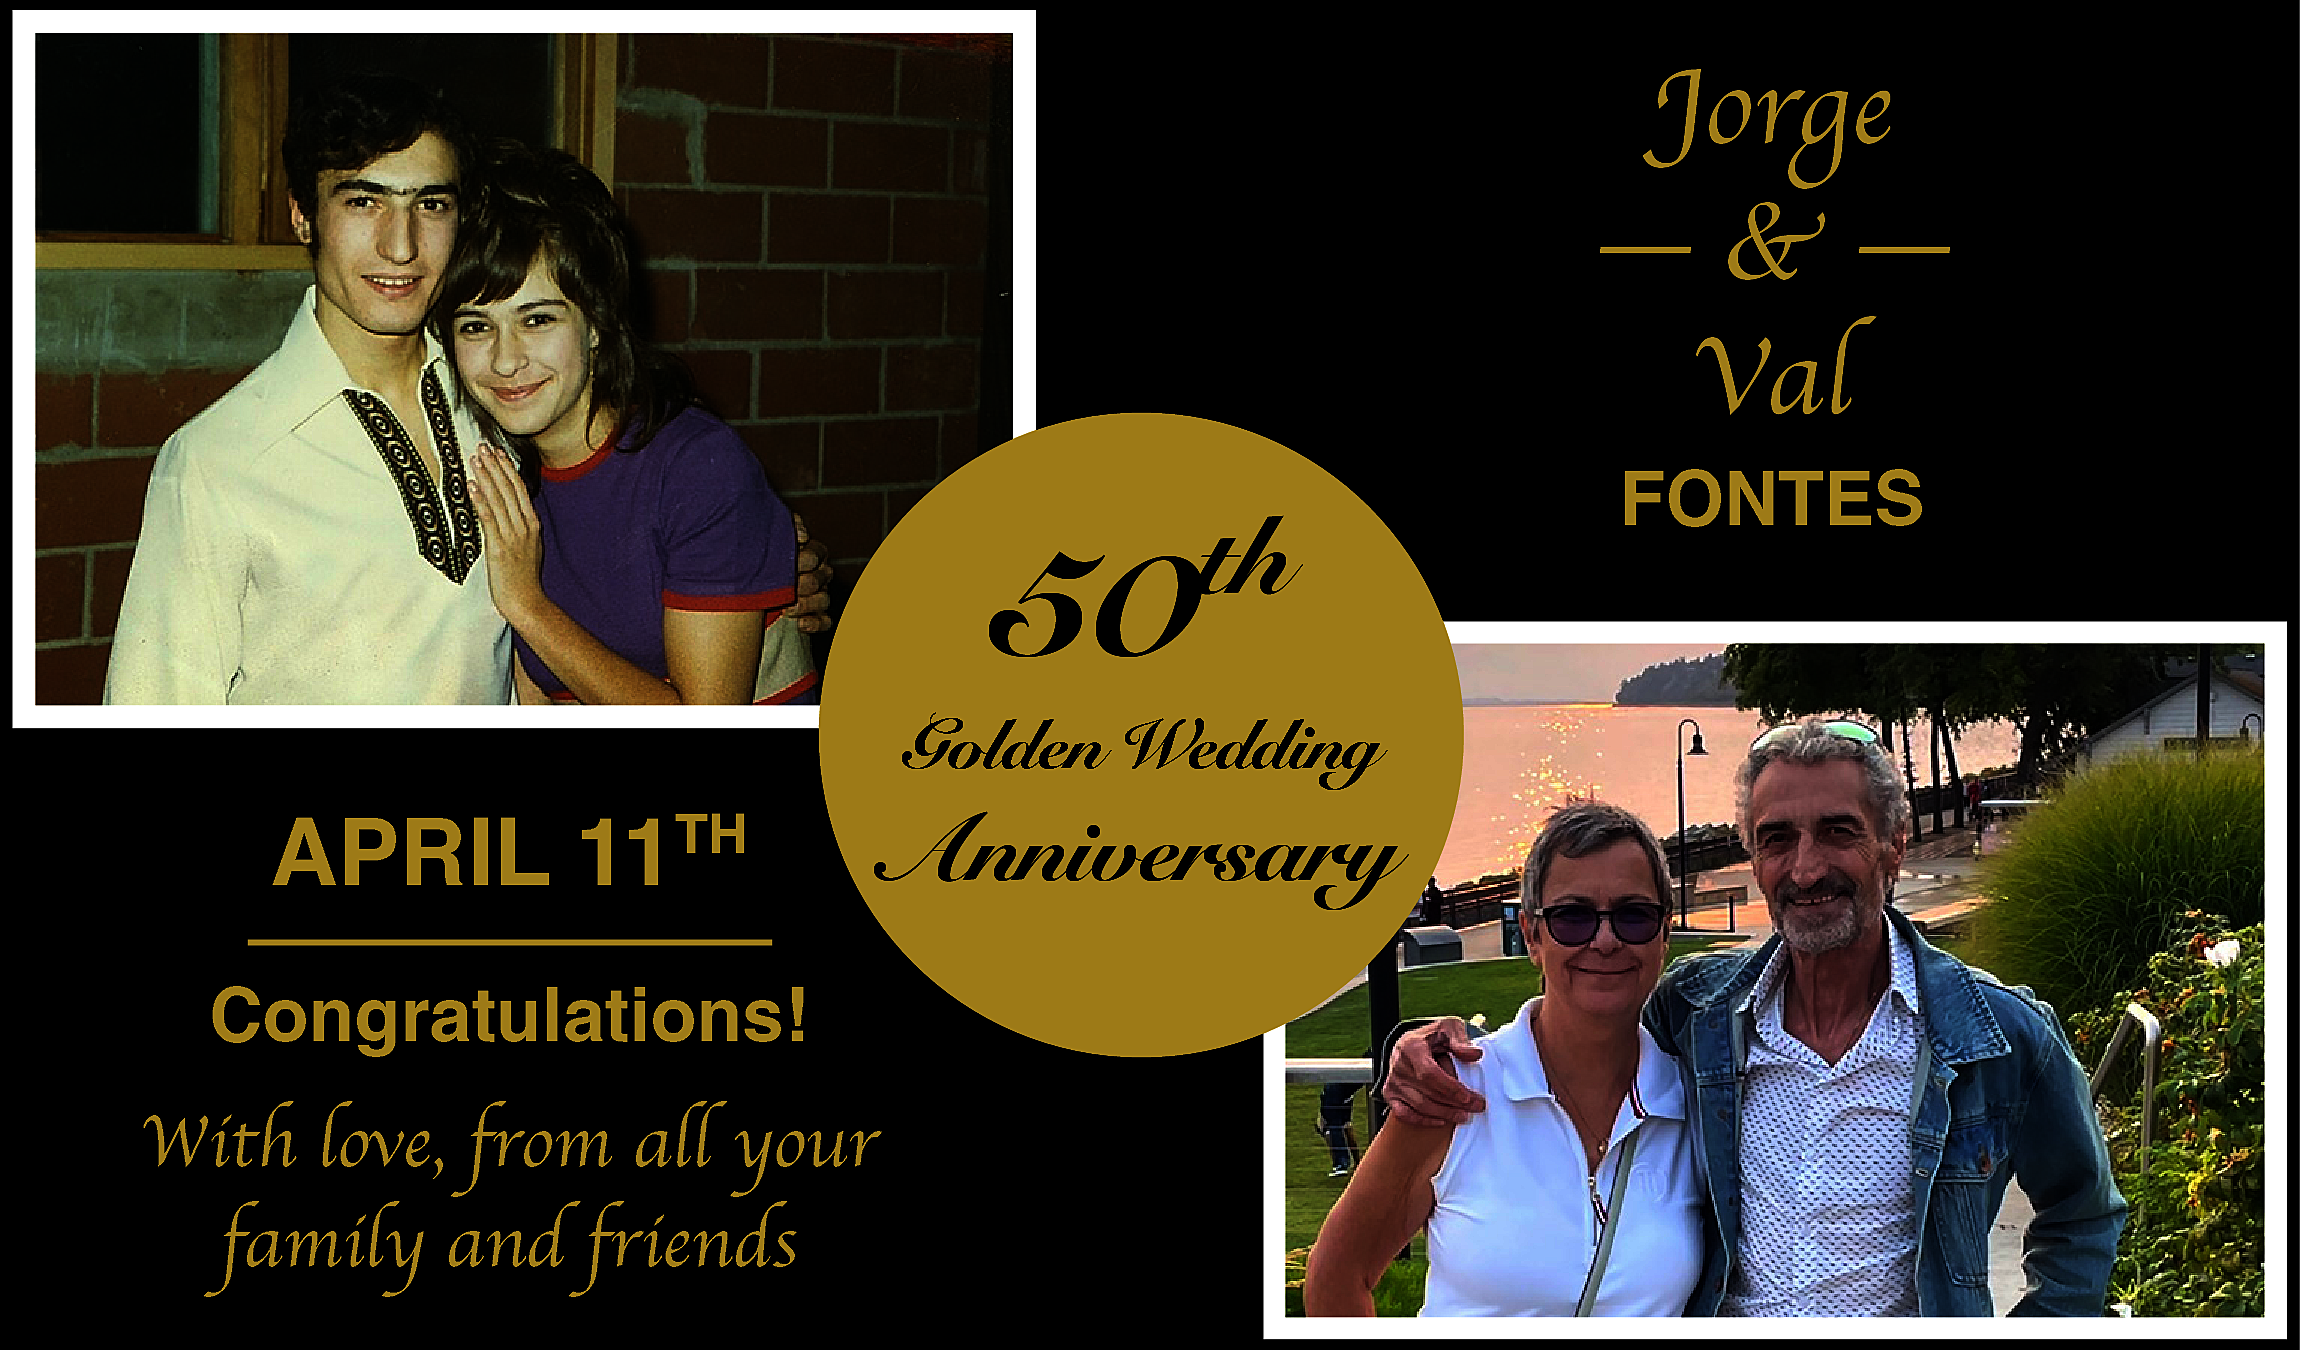 50 <br> <br>th <br> <br>APRIL  50    th    APRIL 11TH  Congratulations!  With love, from all your  family and friends    Golden Wedding    Anniversary    Jorge  —&—  Val  FONTES    